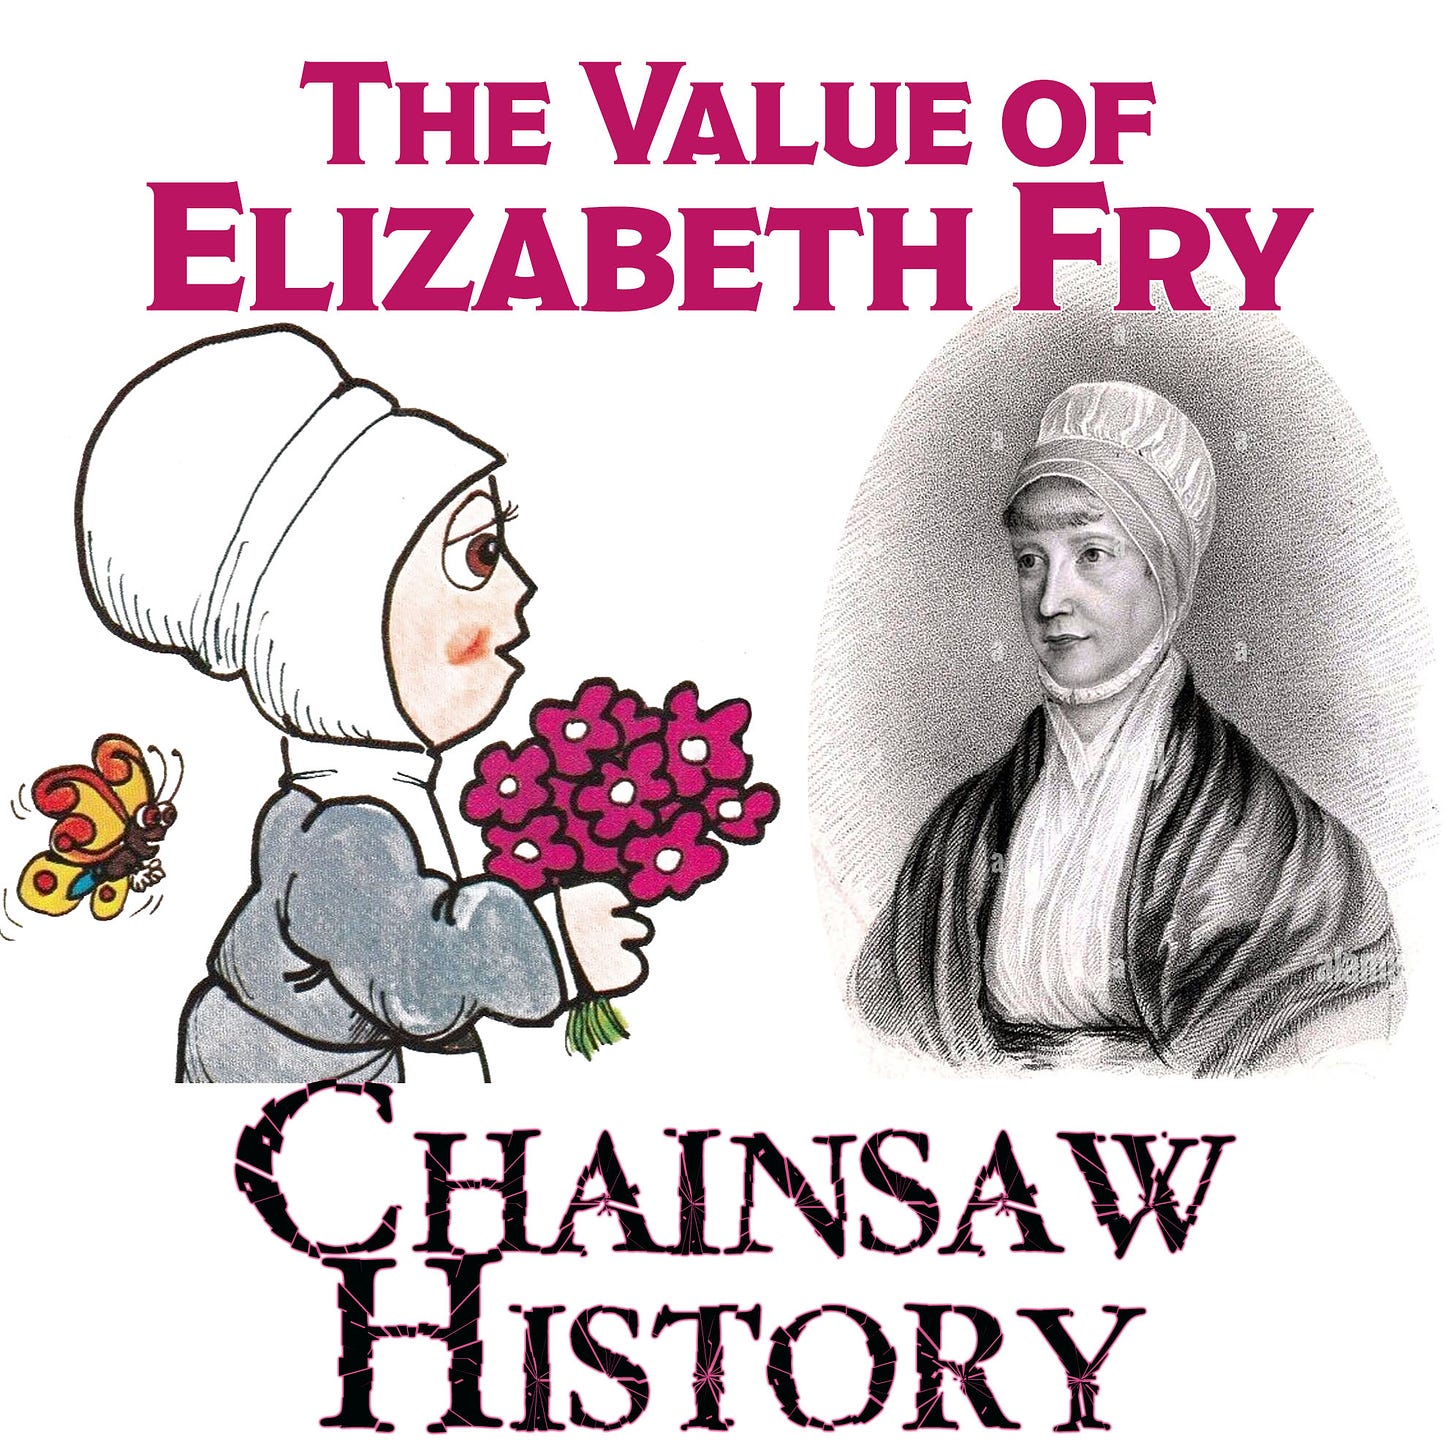 The Value of Elizabeth Fry